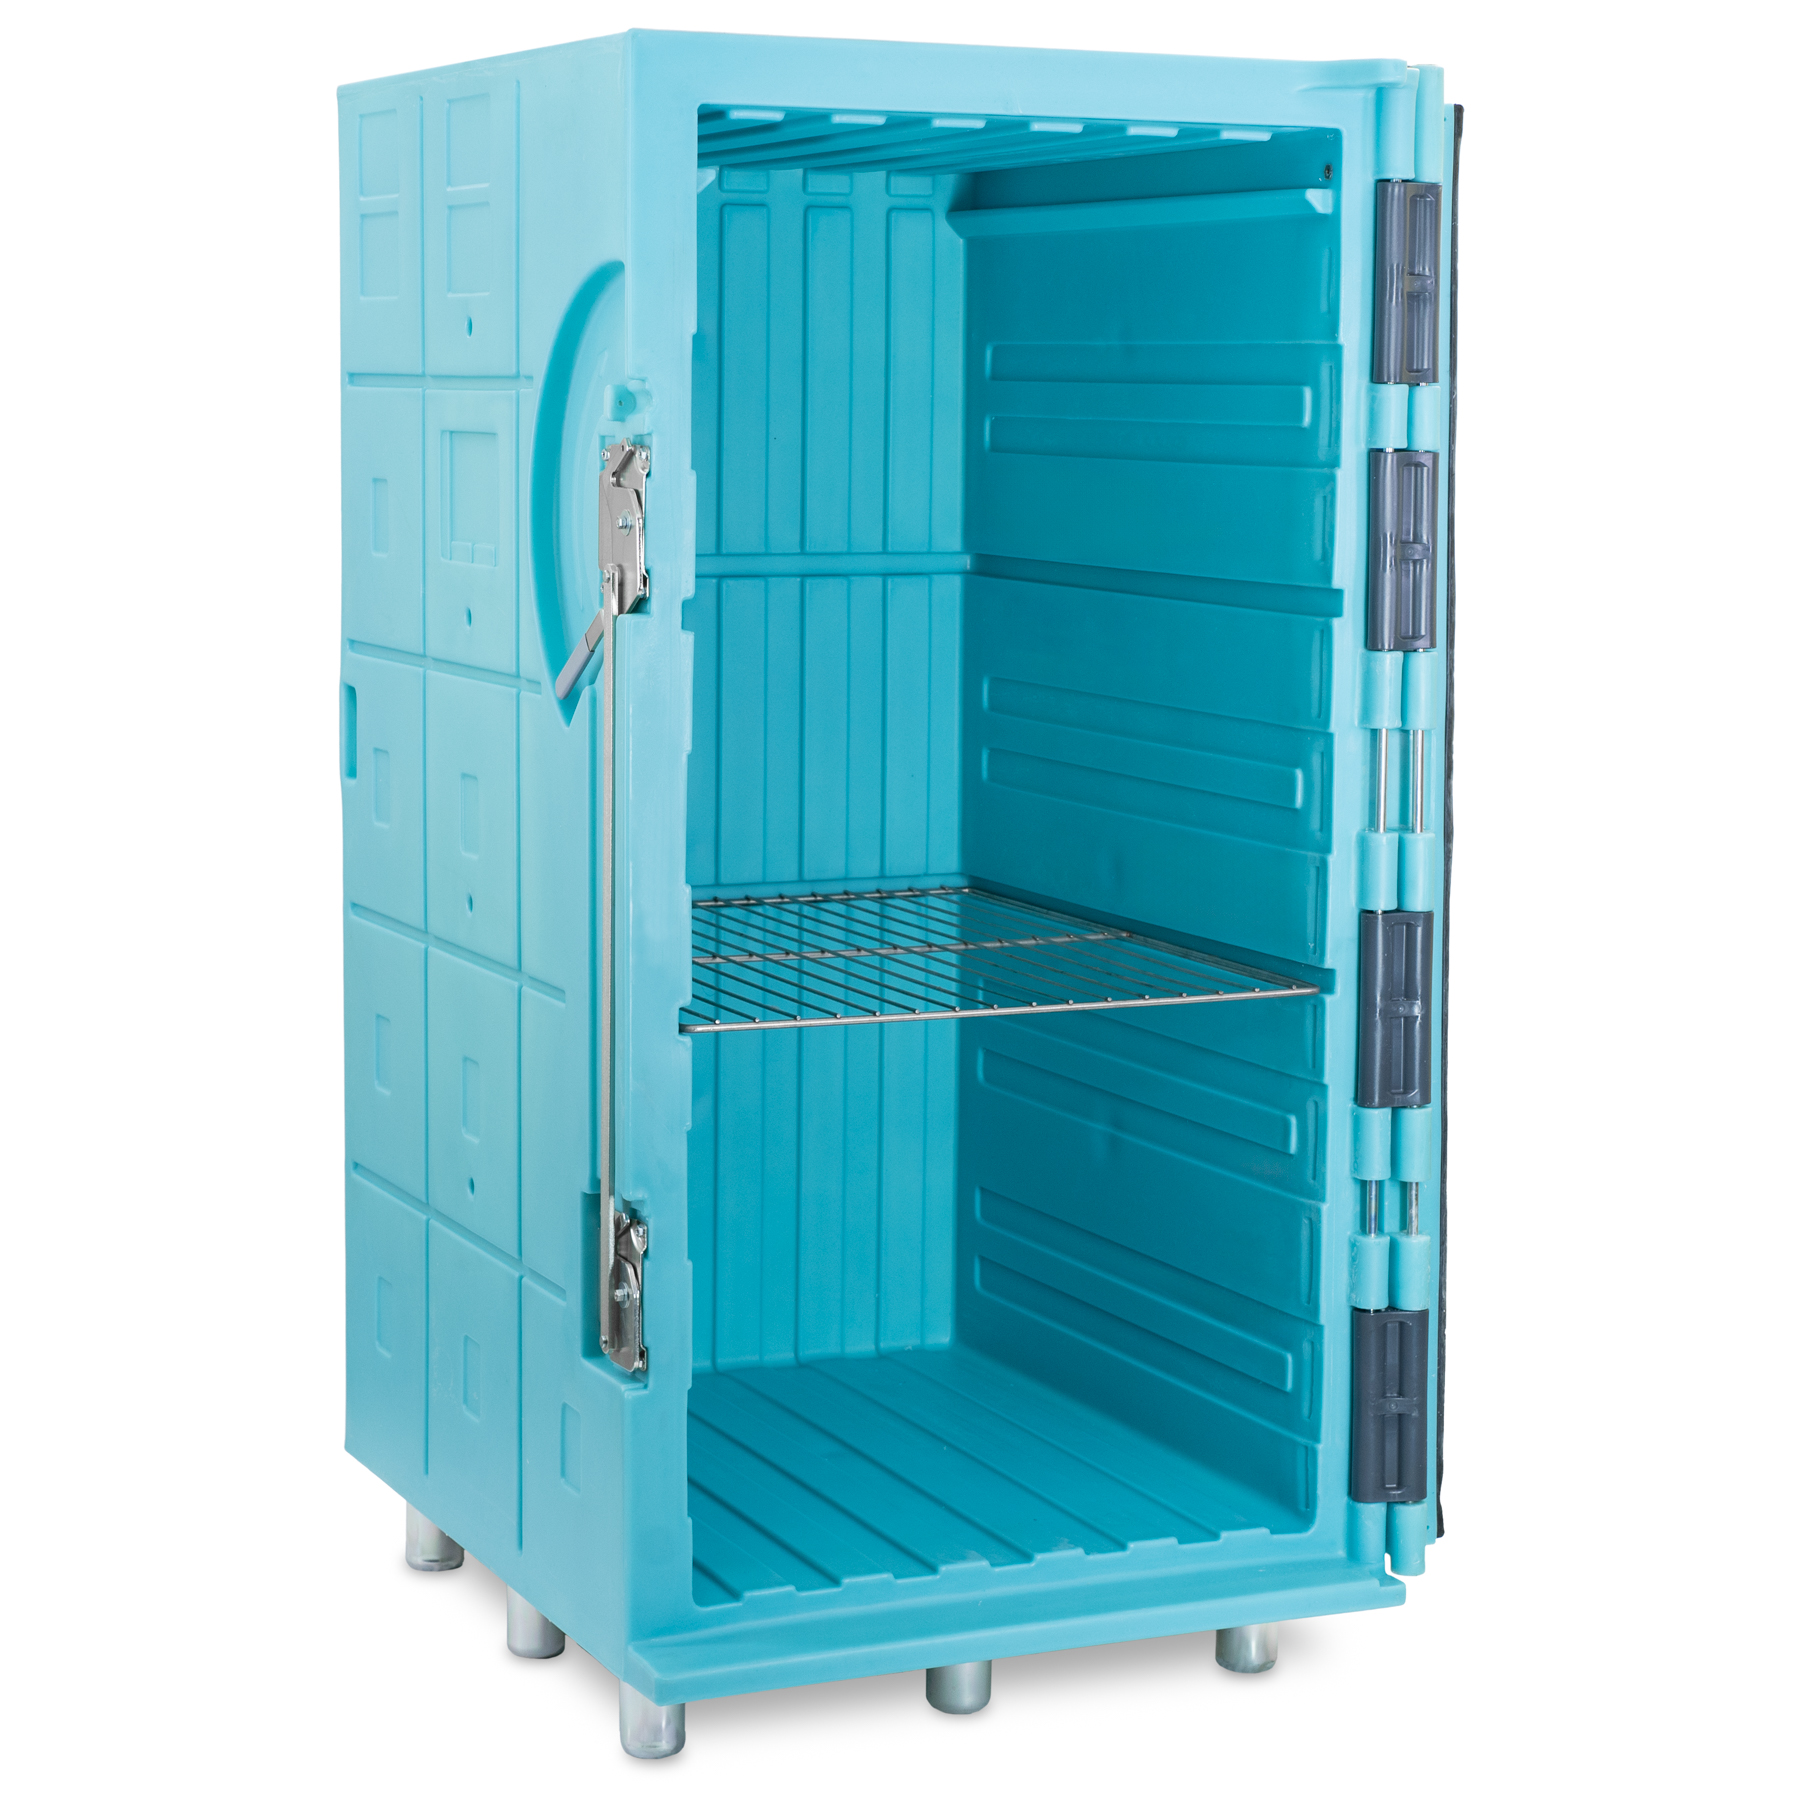 INSULATED ROLL 1410 OLIVO MIDDLE SHELF